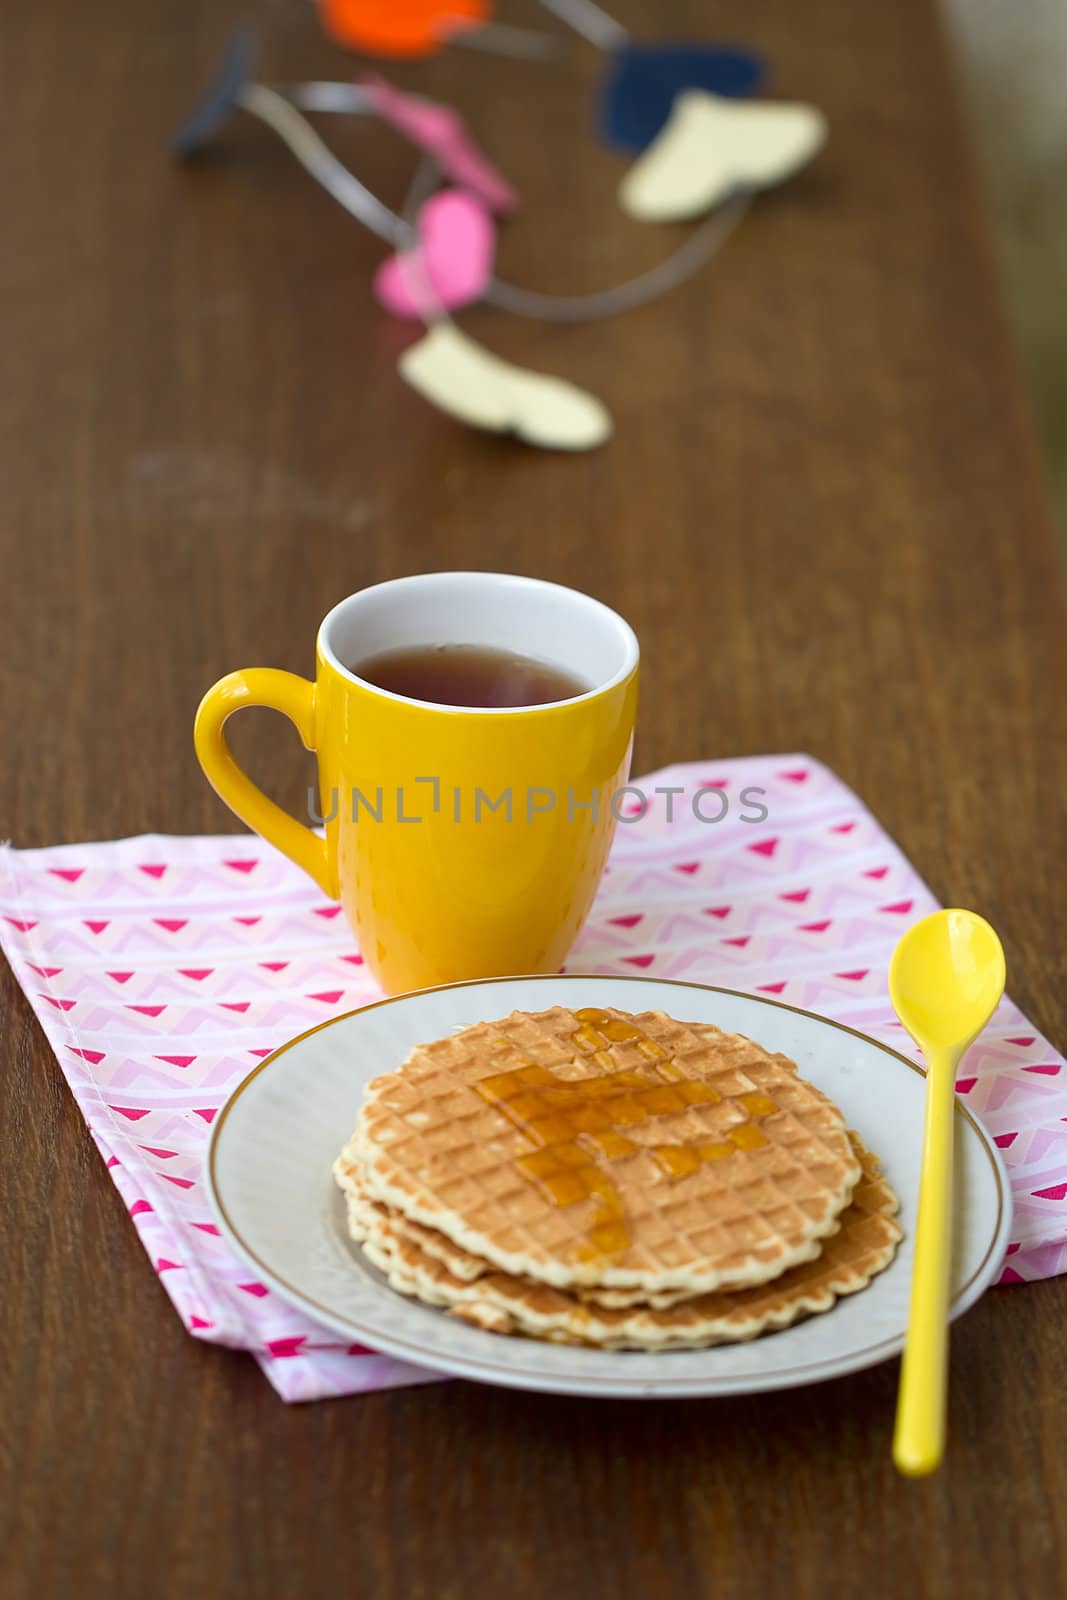 Round wafers, yellow cup with spoon on a napkin by victosha